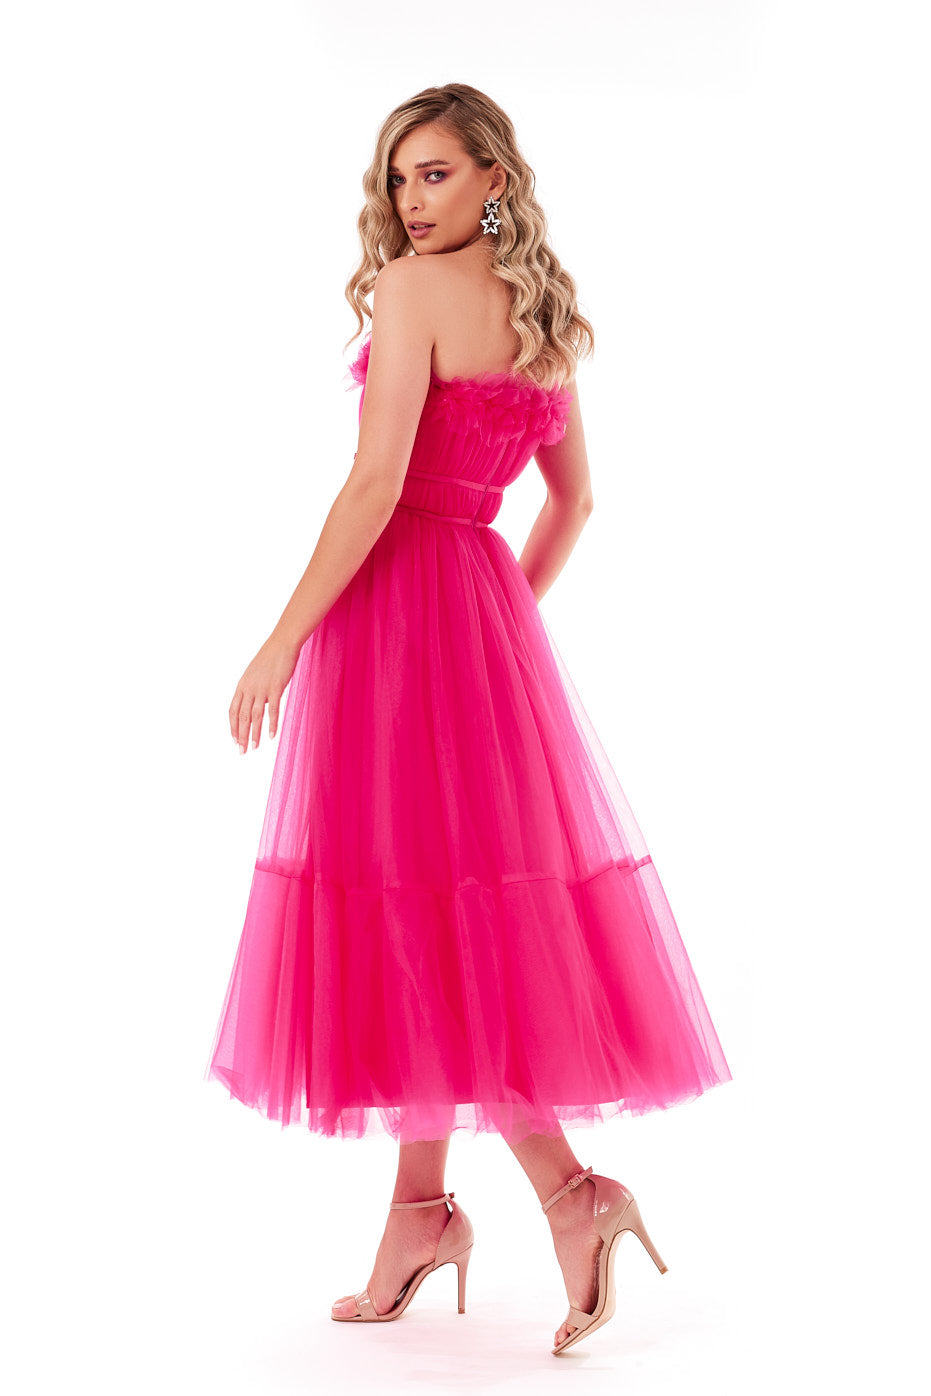 Rochie Tip Corset Din Tulle